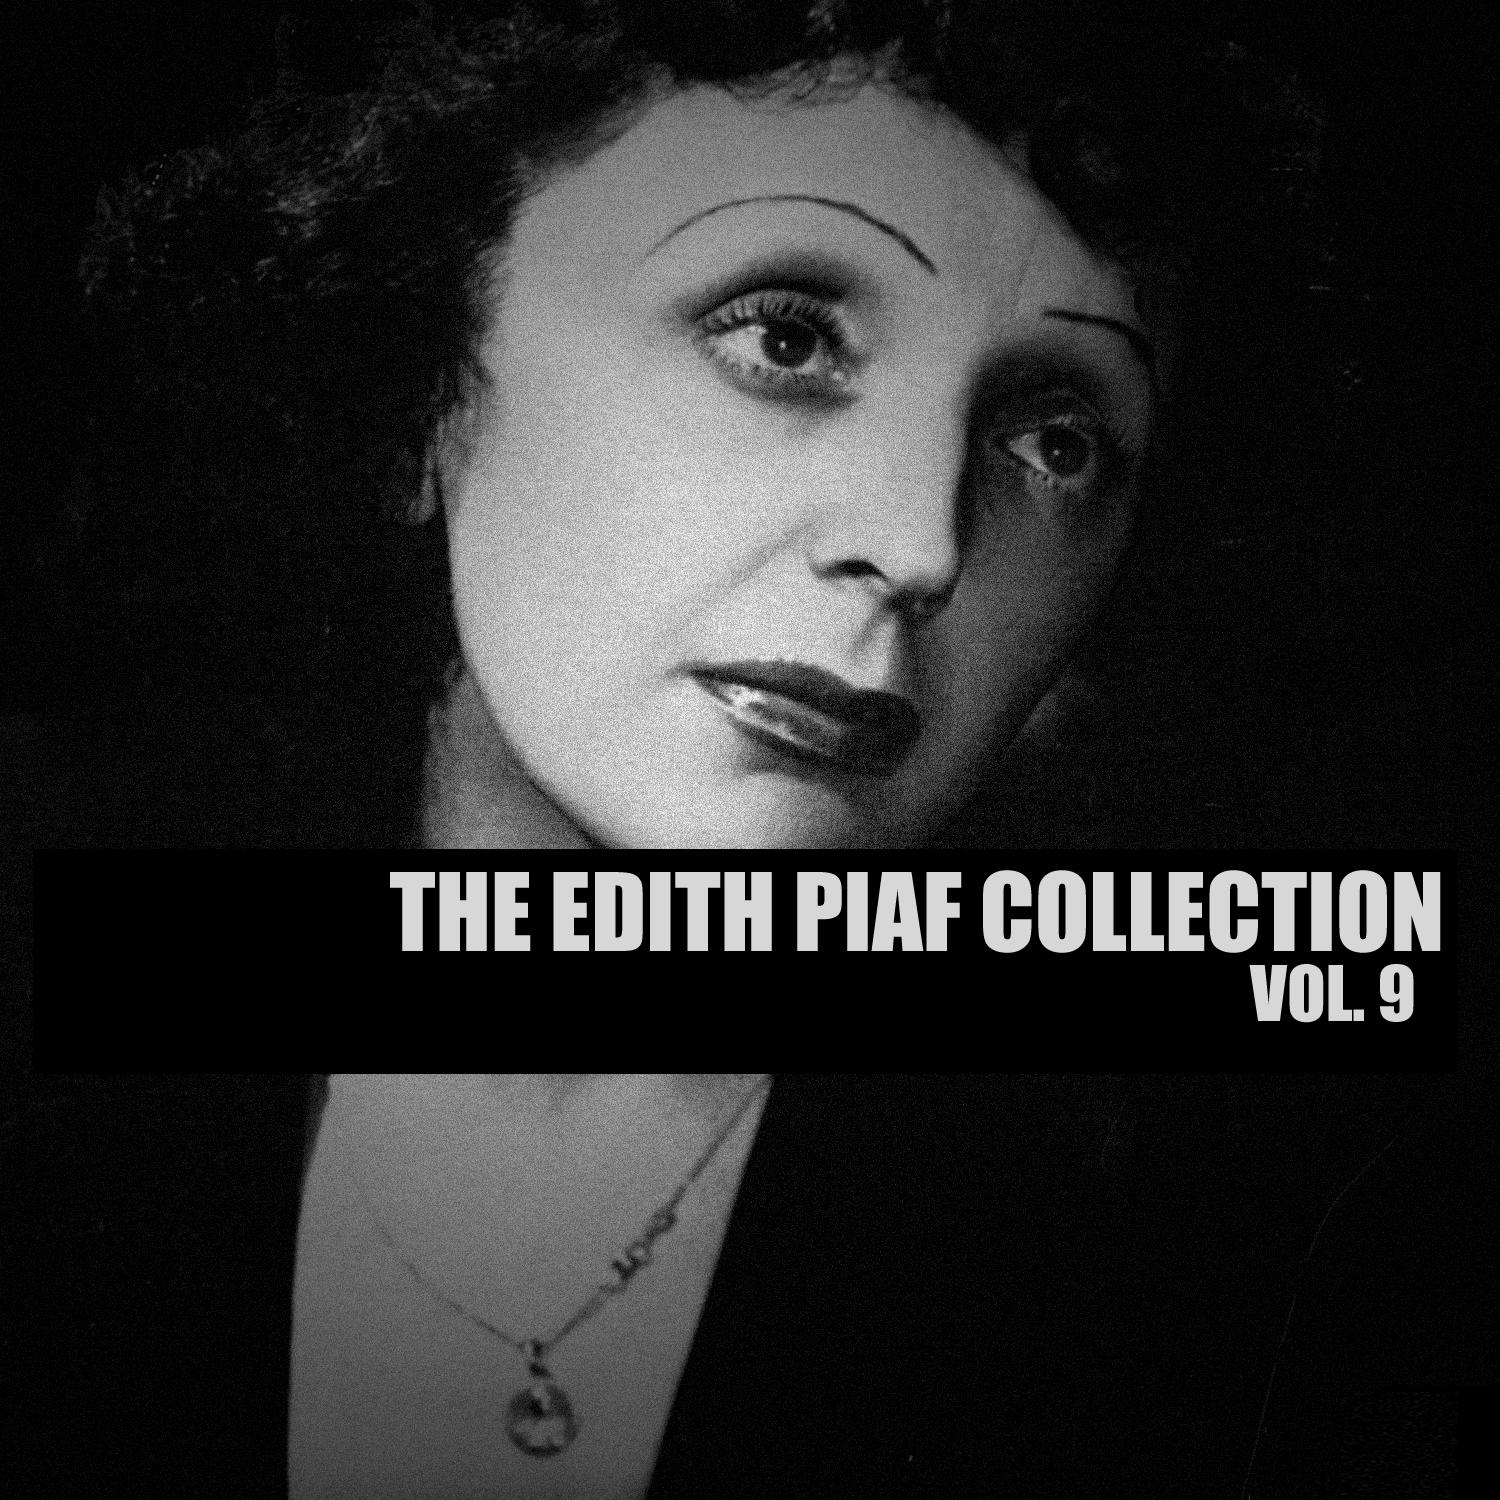 The Edith Piaf Collection, Vol. 9